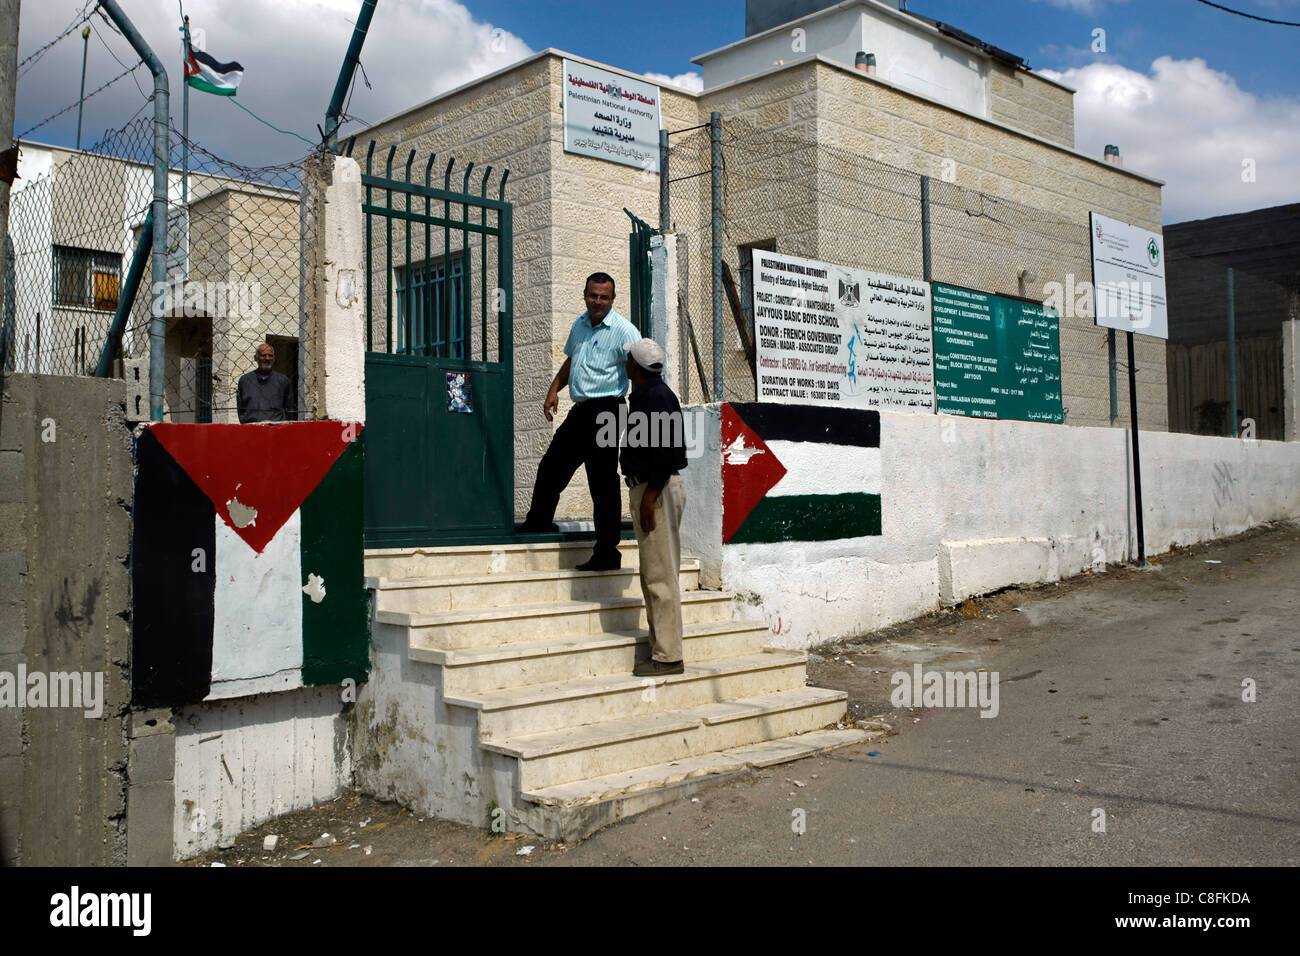 Palestinian flags painted at the entrance to council house of Jaayus village West bank Occupied Palestinian territories Israel Stock Photo